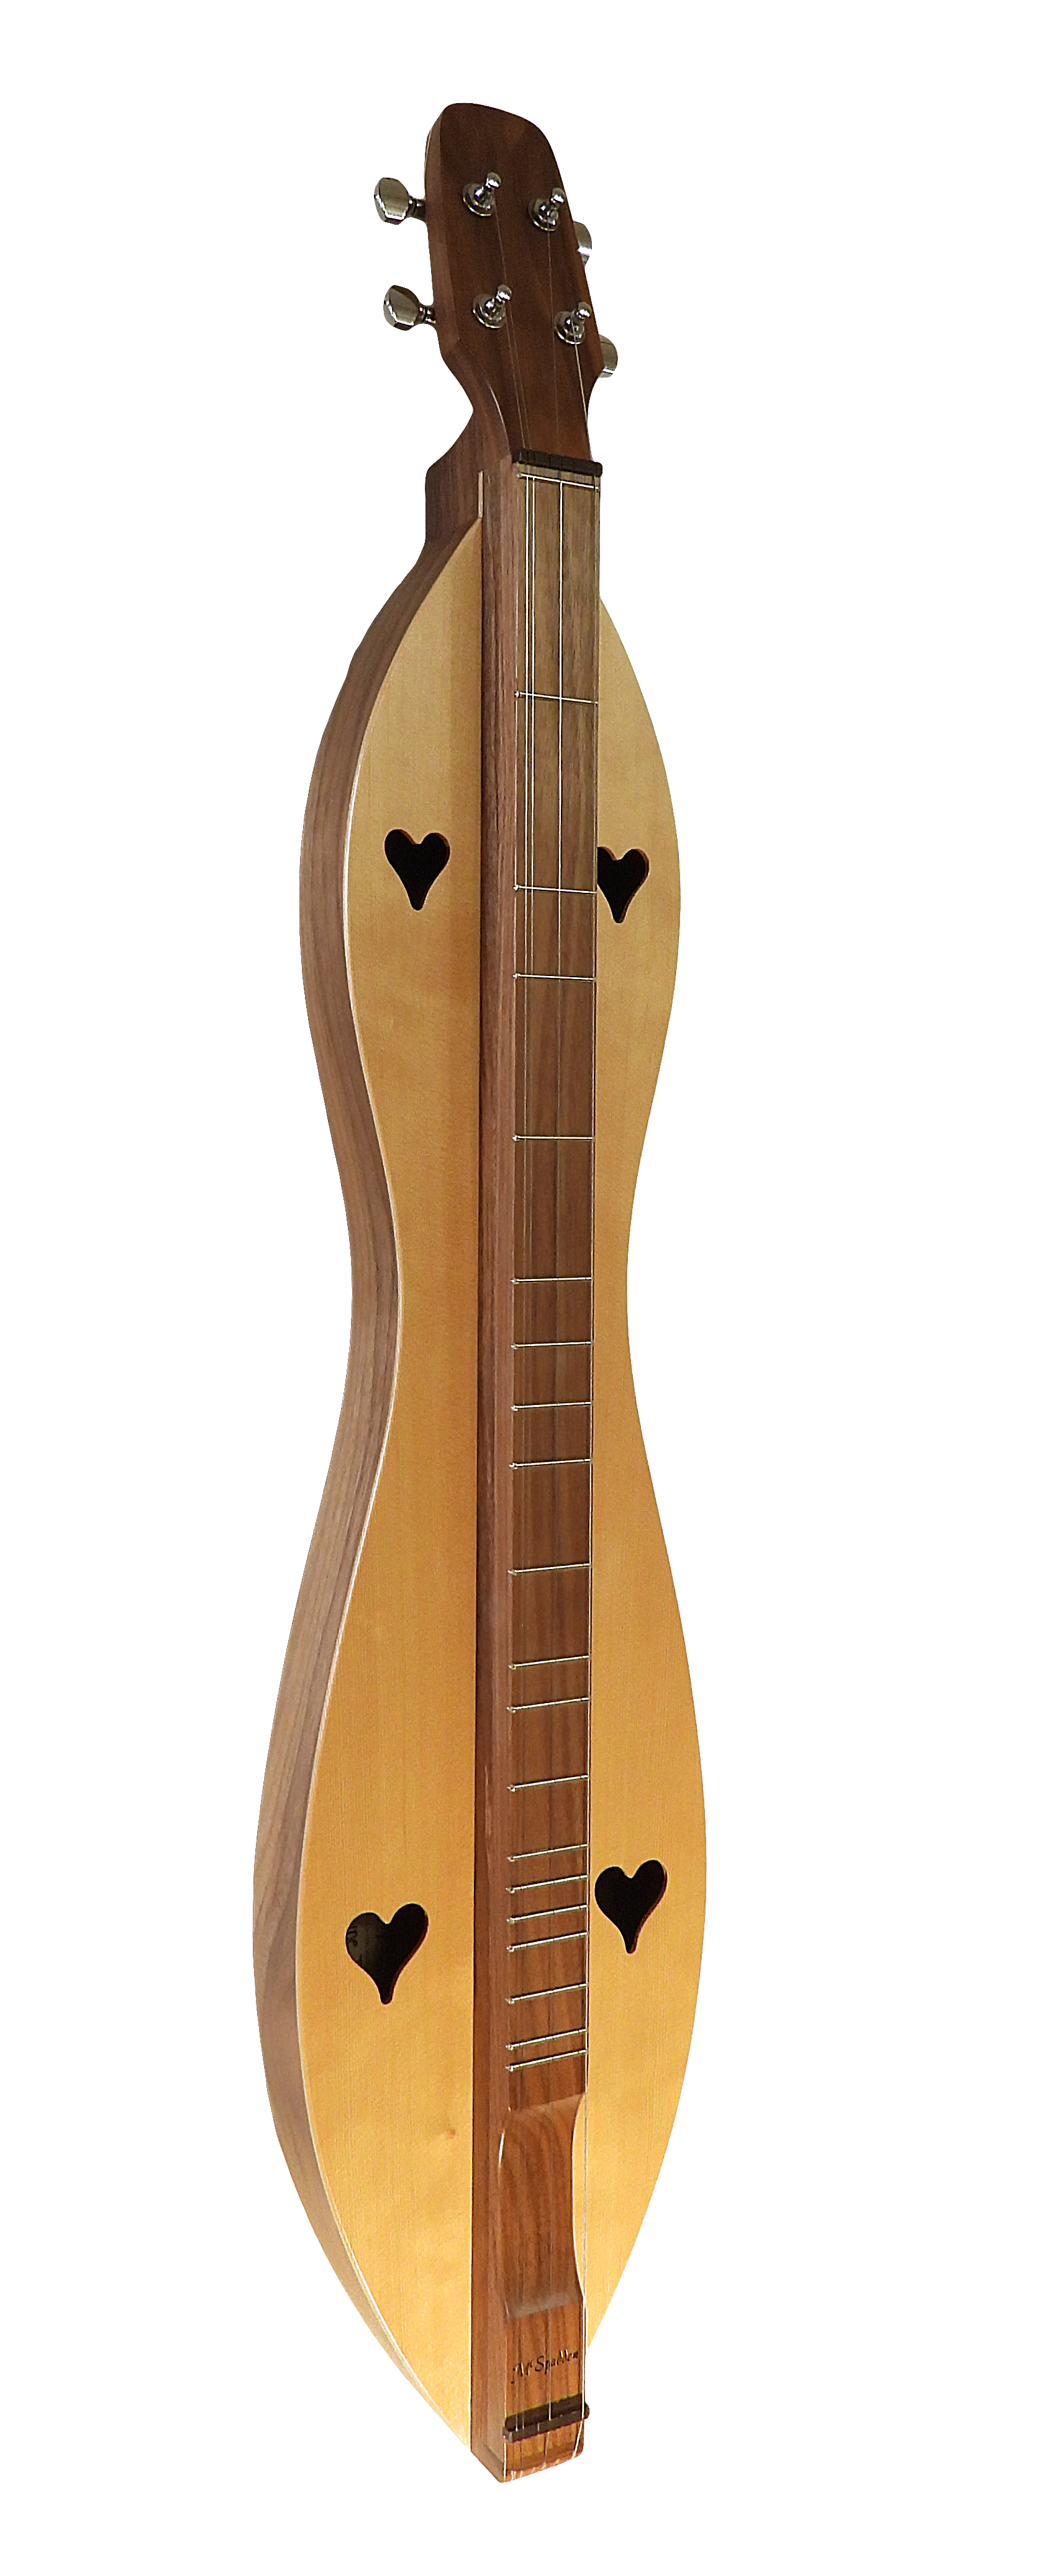 A 4 String, Flathead, Hourglass, with Walnut back and sides, Spruce top (4FHWS) mandolin with two hearts on it, backed by a lifetime warranty.